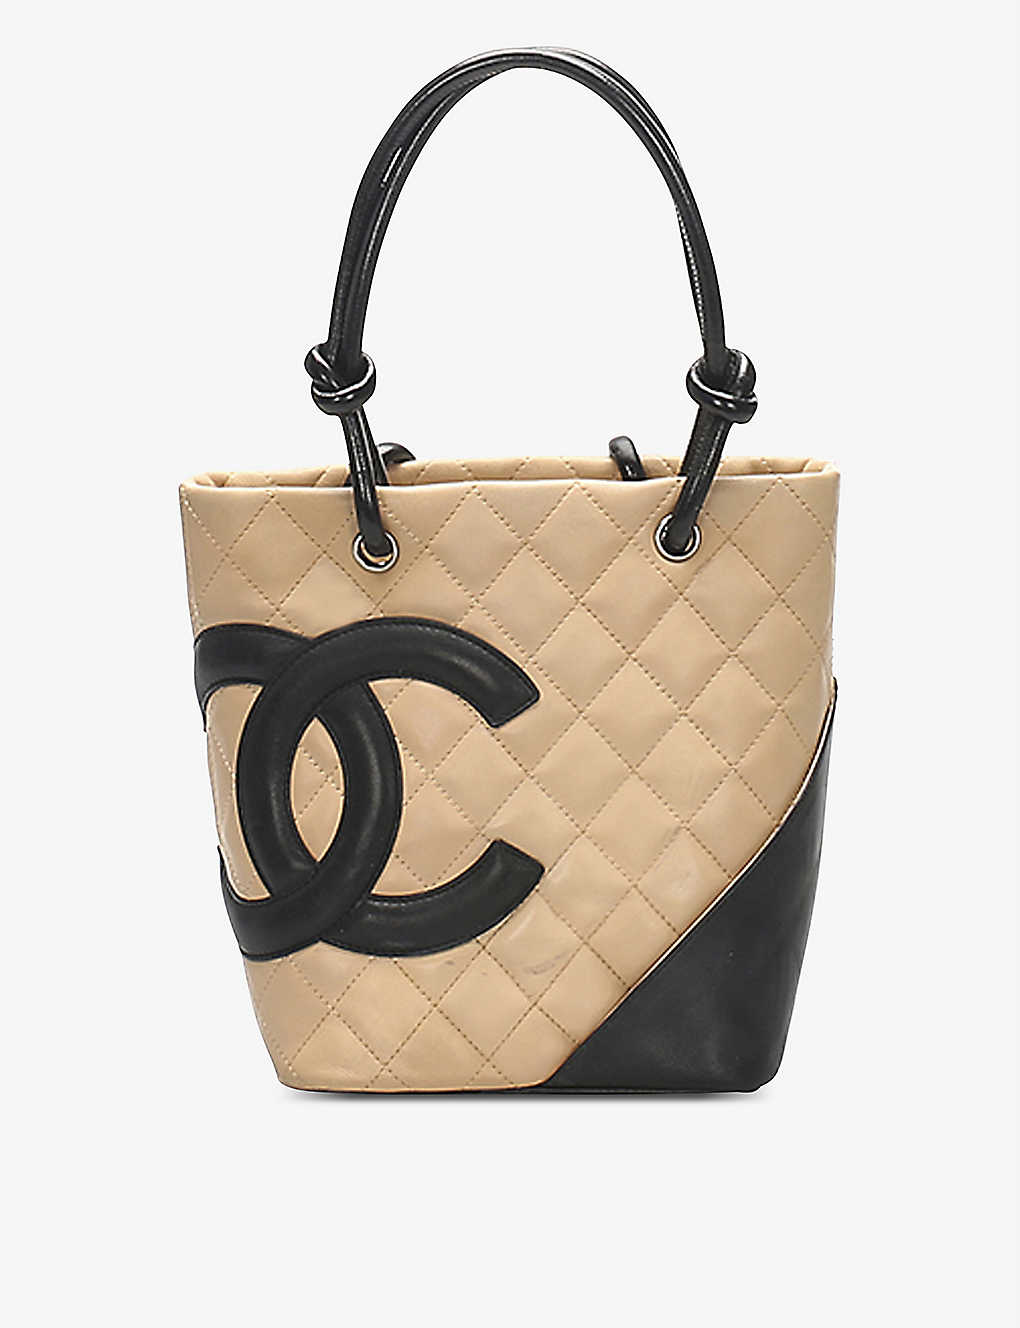 RESELLFRIDGES - Pre-loved Chanel Cambon Ligne leather tote bag